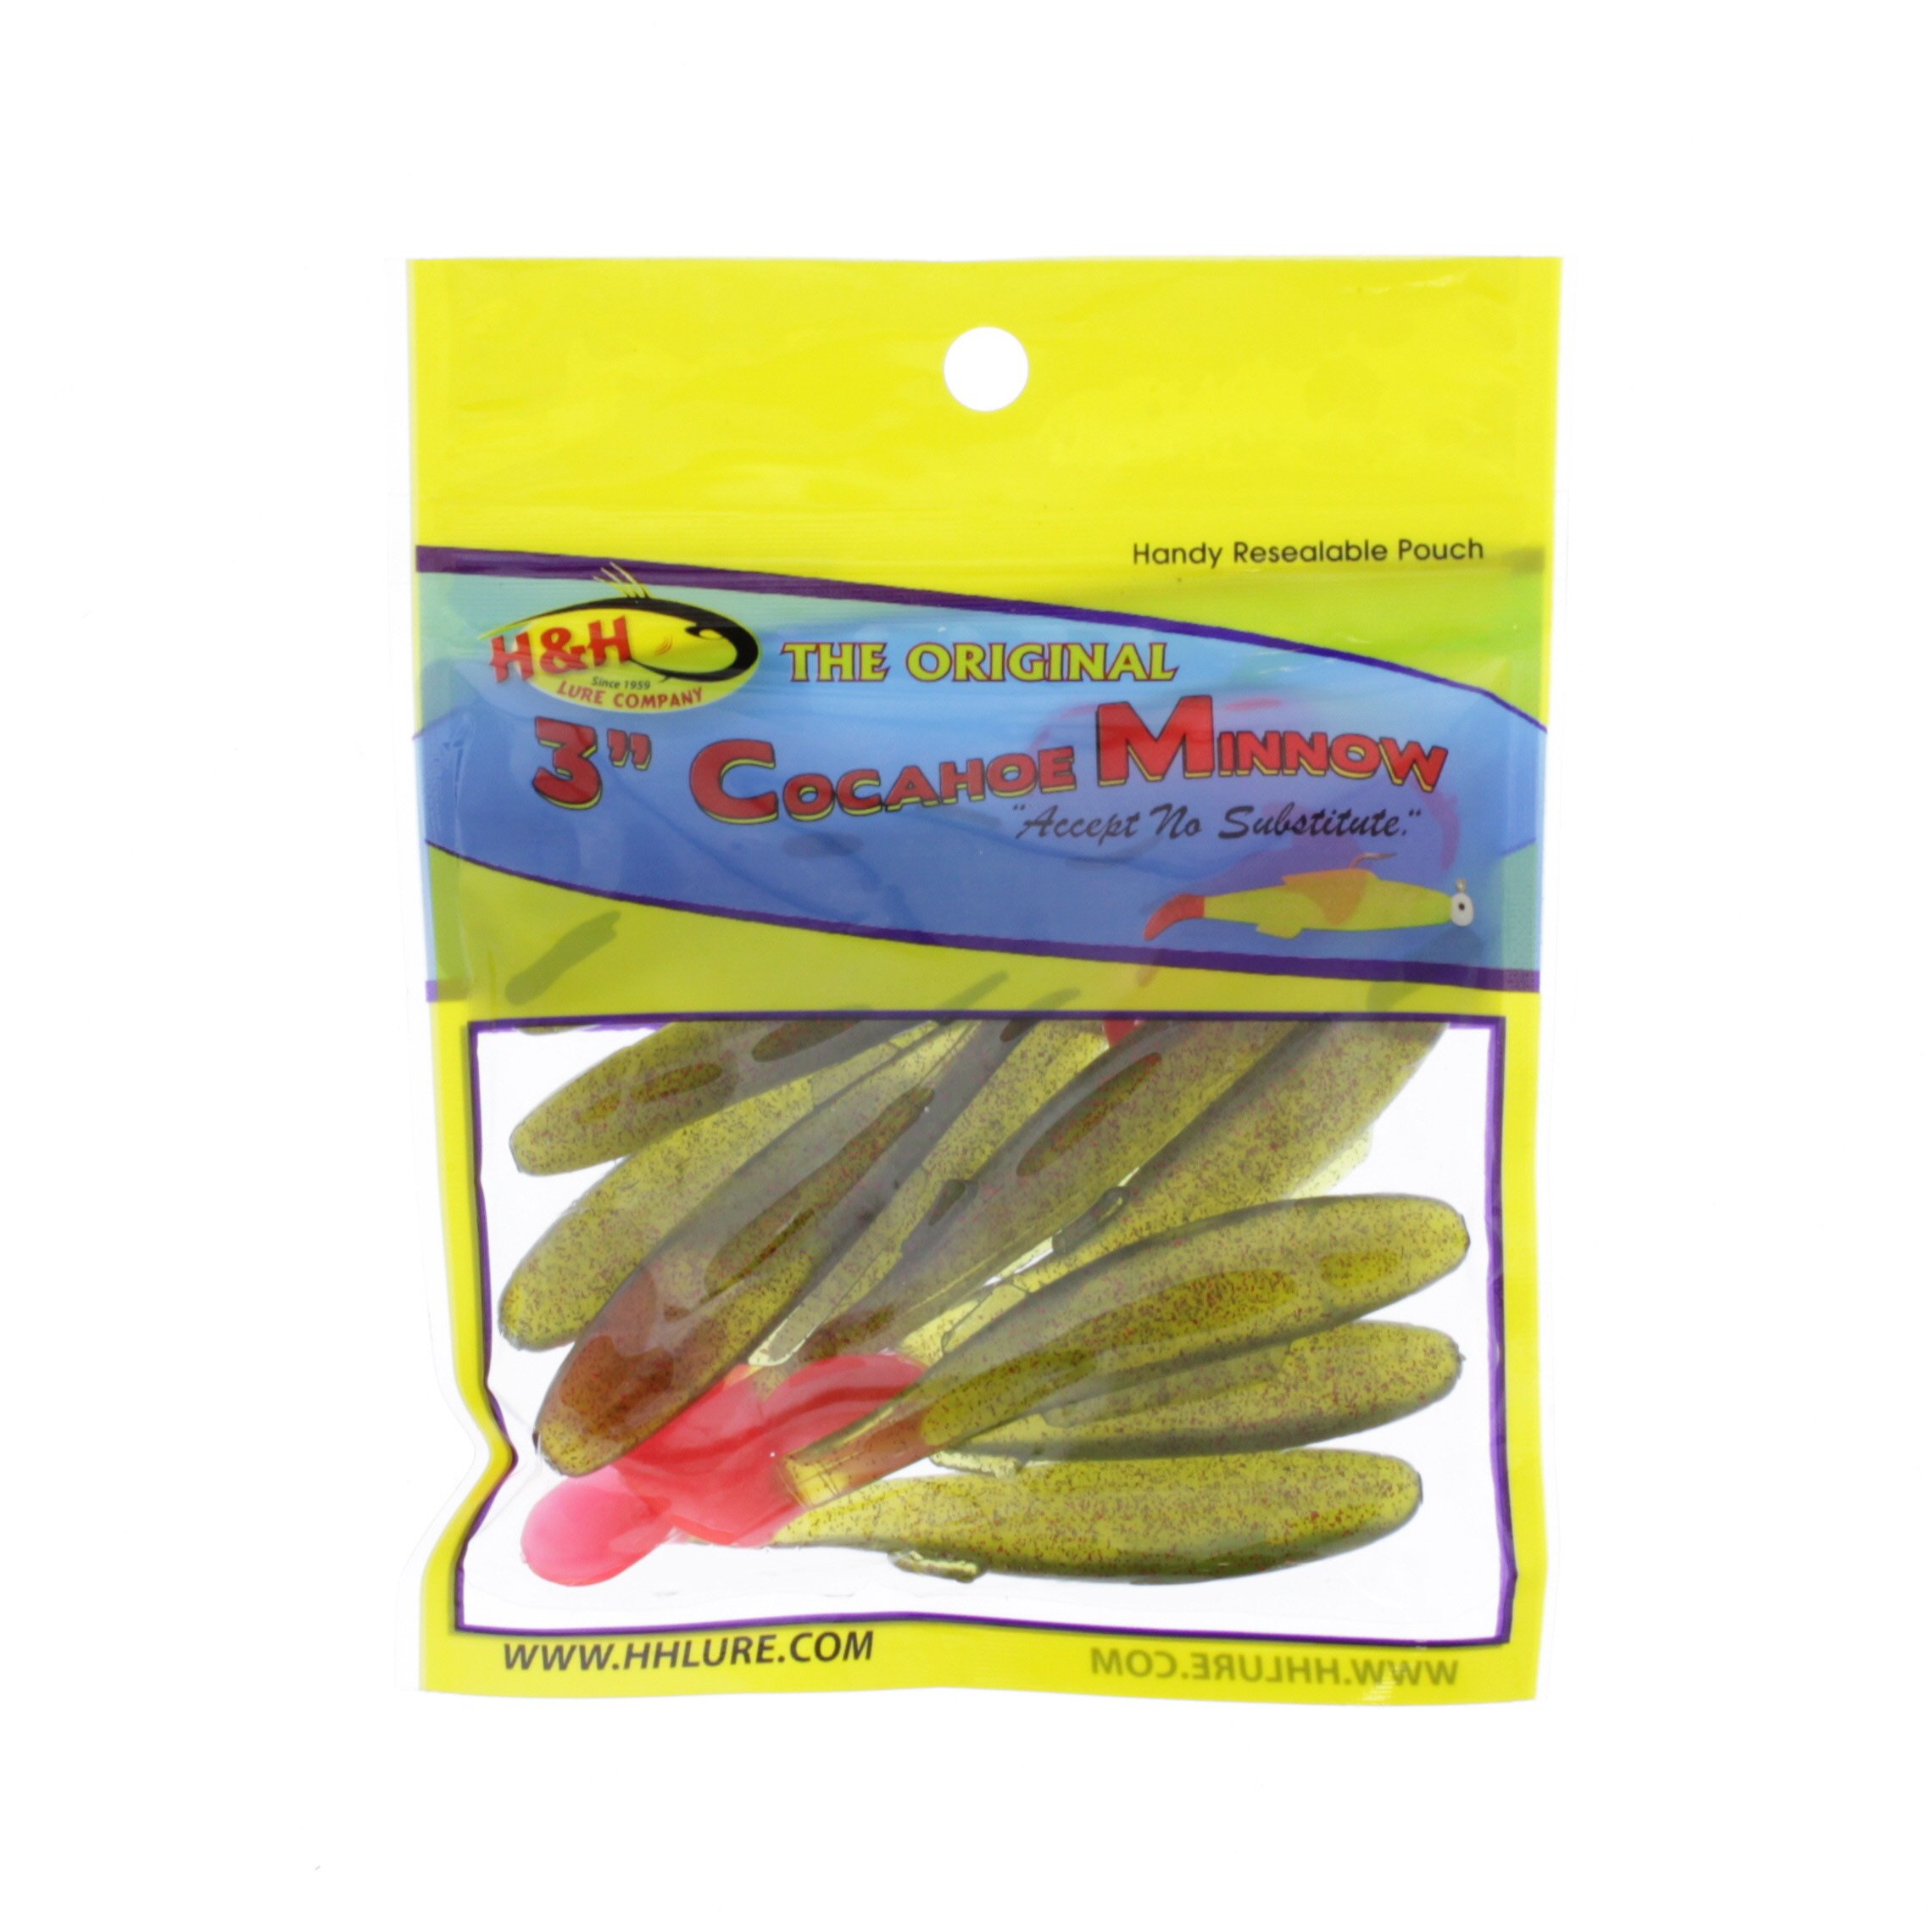 HLURE Company HLures Original Cocahoe Minnow - New Penny